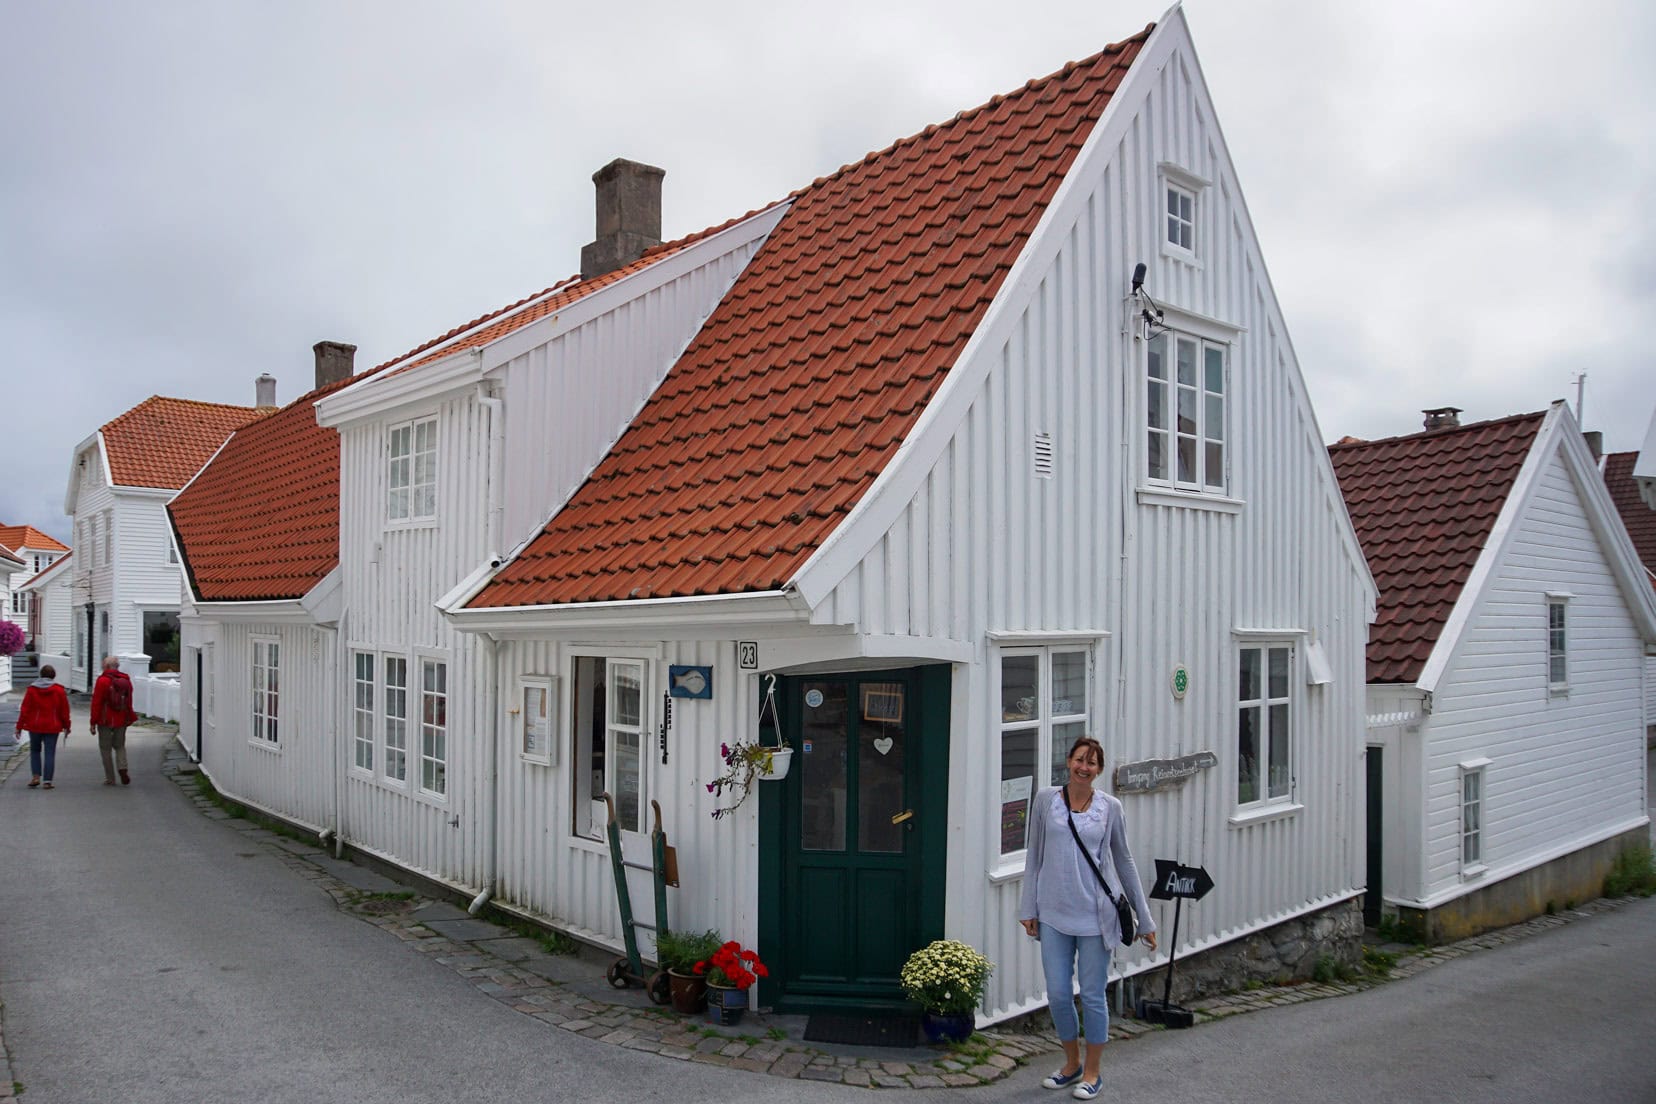 33-Best-Things-to-do-in-Skudeneshavn-and-Karmoy-_smallest-cafe